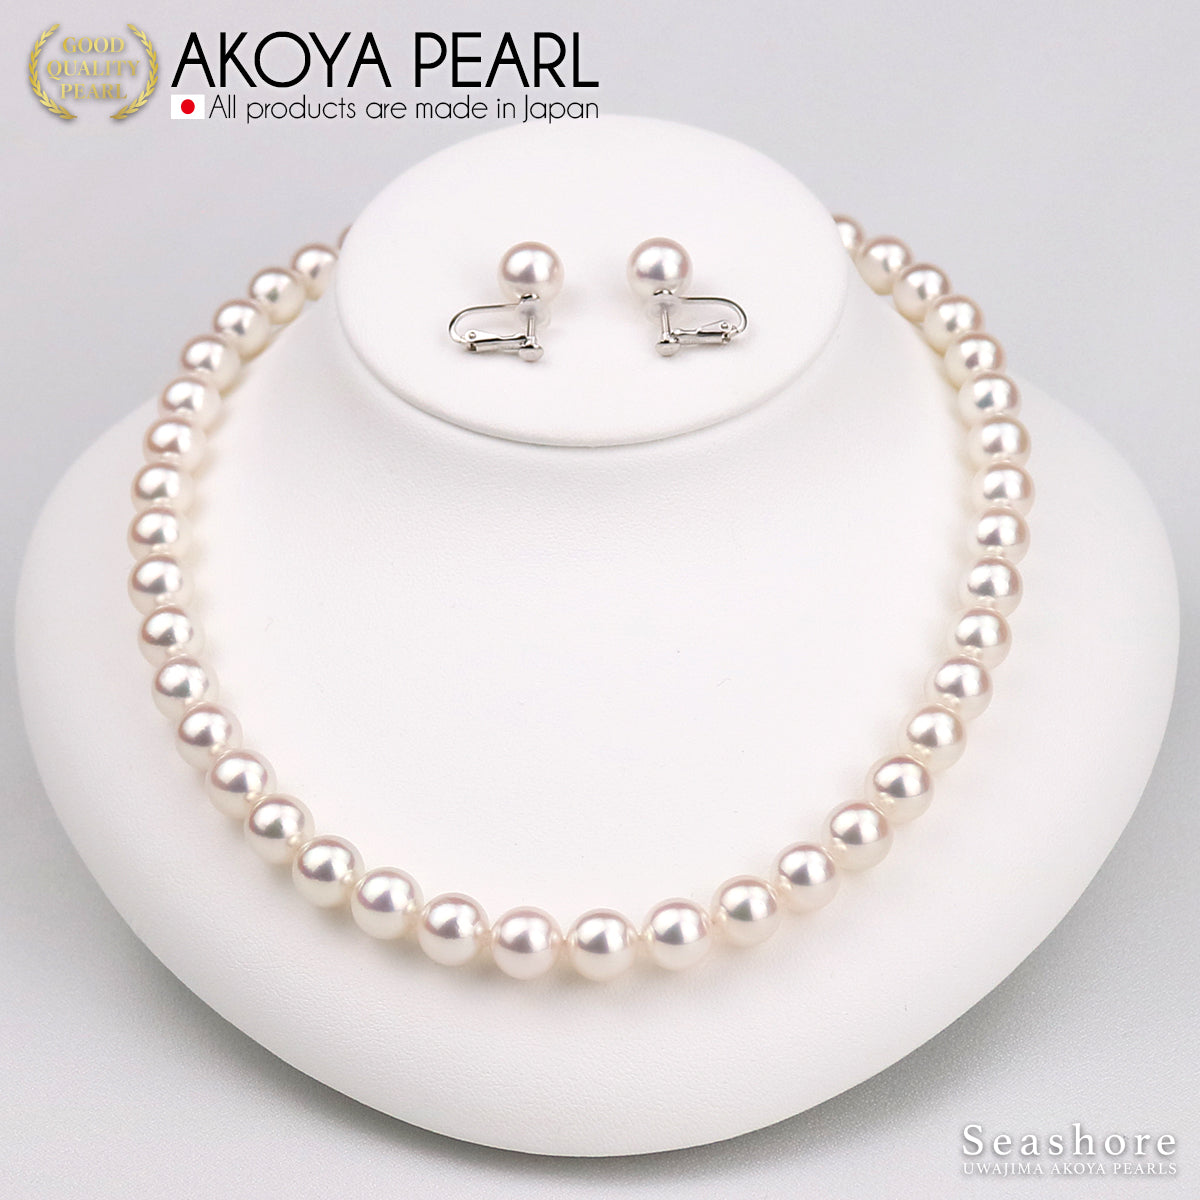 [Specially Selected Material: Florence Pearl] Akoya Pearl Formal Necklace Set of 2 [8.0-8.5mm] Earrings/Earrings White Roll Thickness 0.5mm or More Certificate of Authenticity Storage Case Included